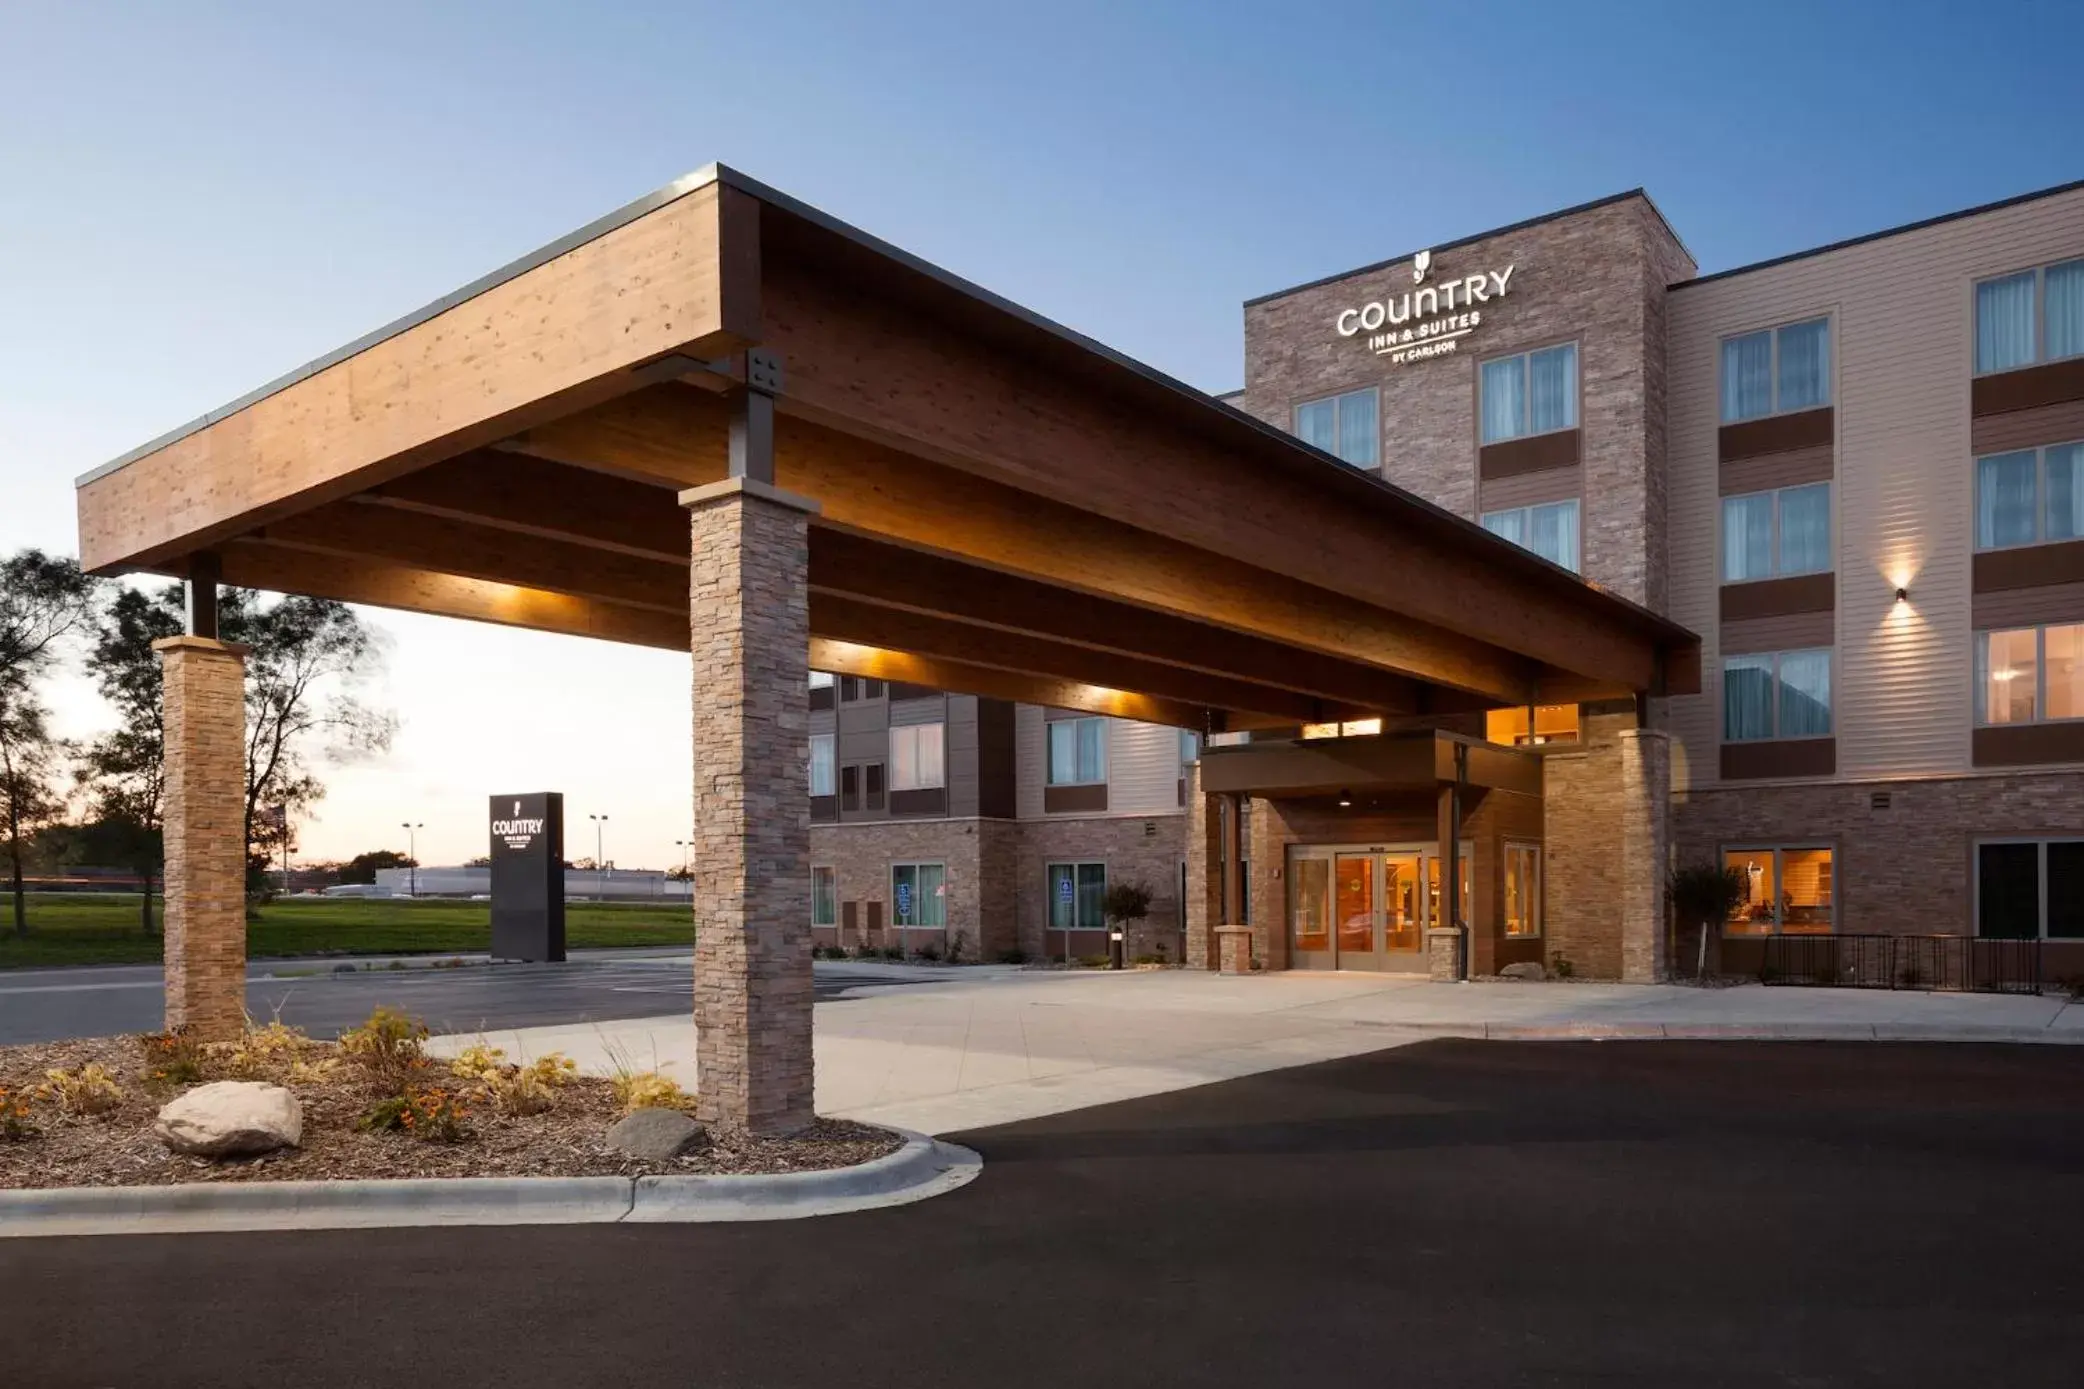 Property building in Country Inn & Suites by Radisson, Austin North (Pflugerville), TX